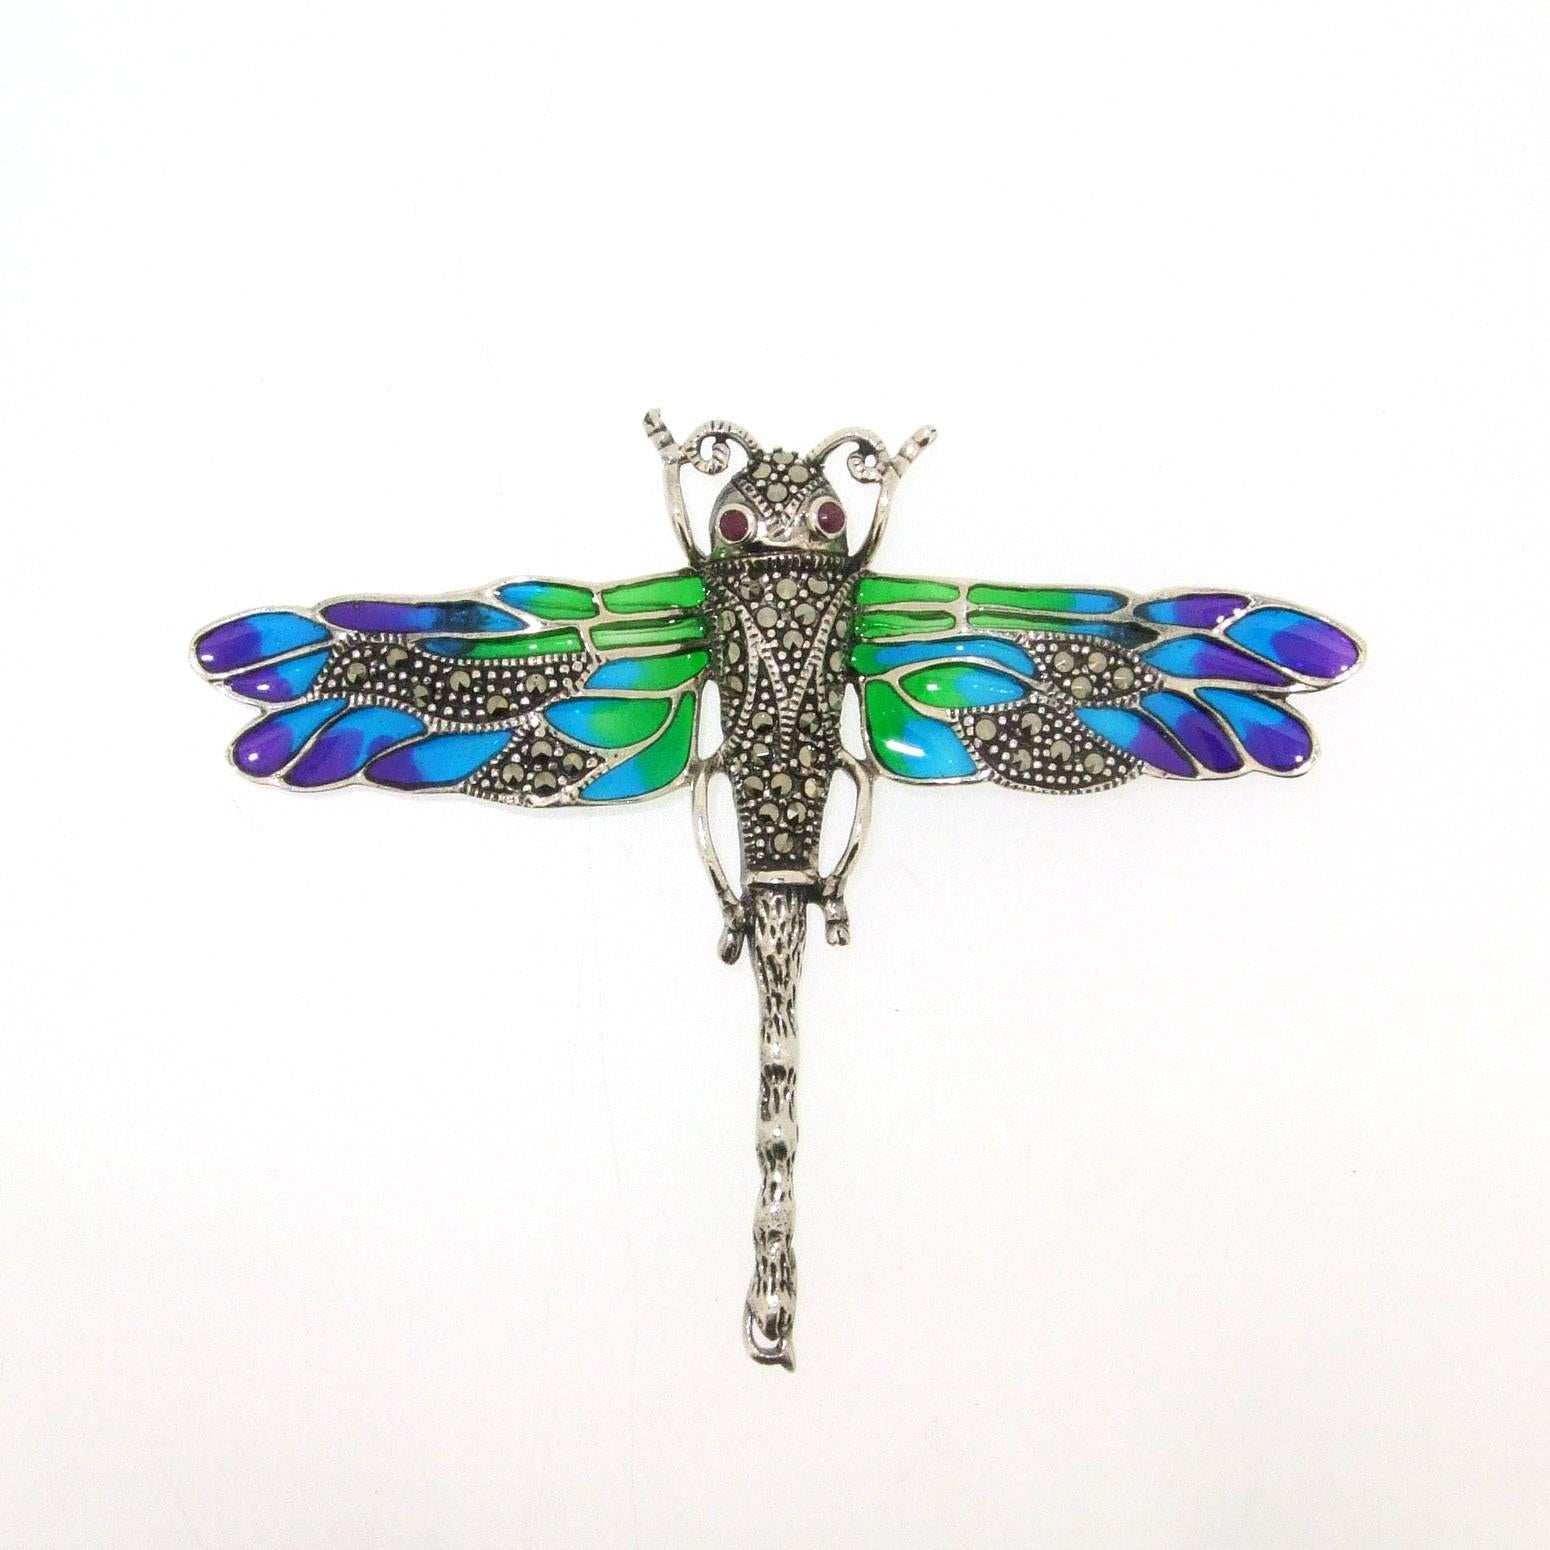 A beautiful Art Nouveau style dragonfly brooch set in sterling silver, hallmarked 925, with see through 'pic a jour' enamel and decorated with sparkling marcasites.

It measures 8cm across by 6.2cm high. 

Our shop Hirst Antiques is in London,